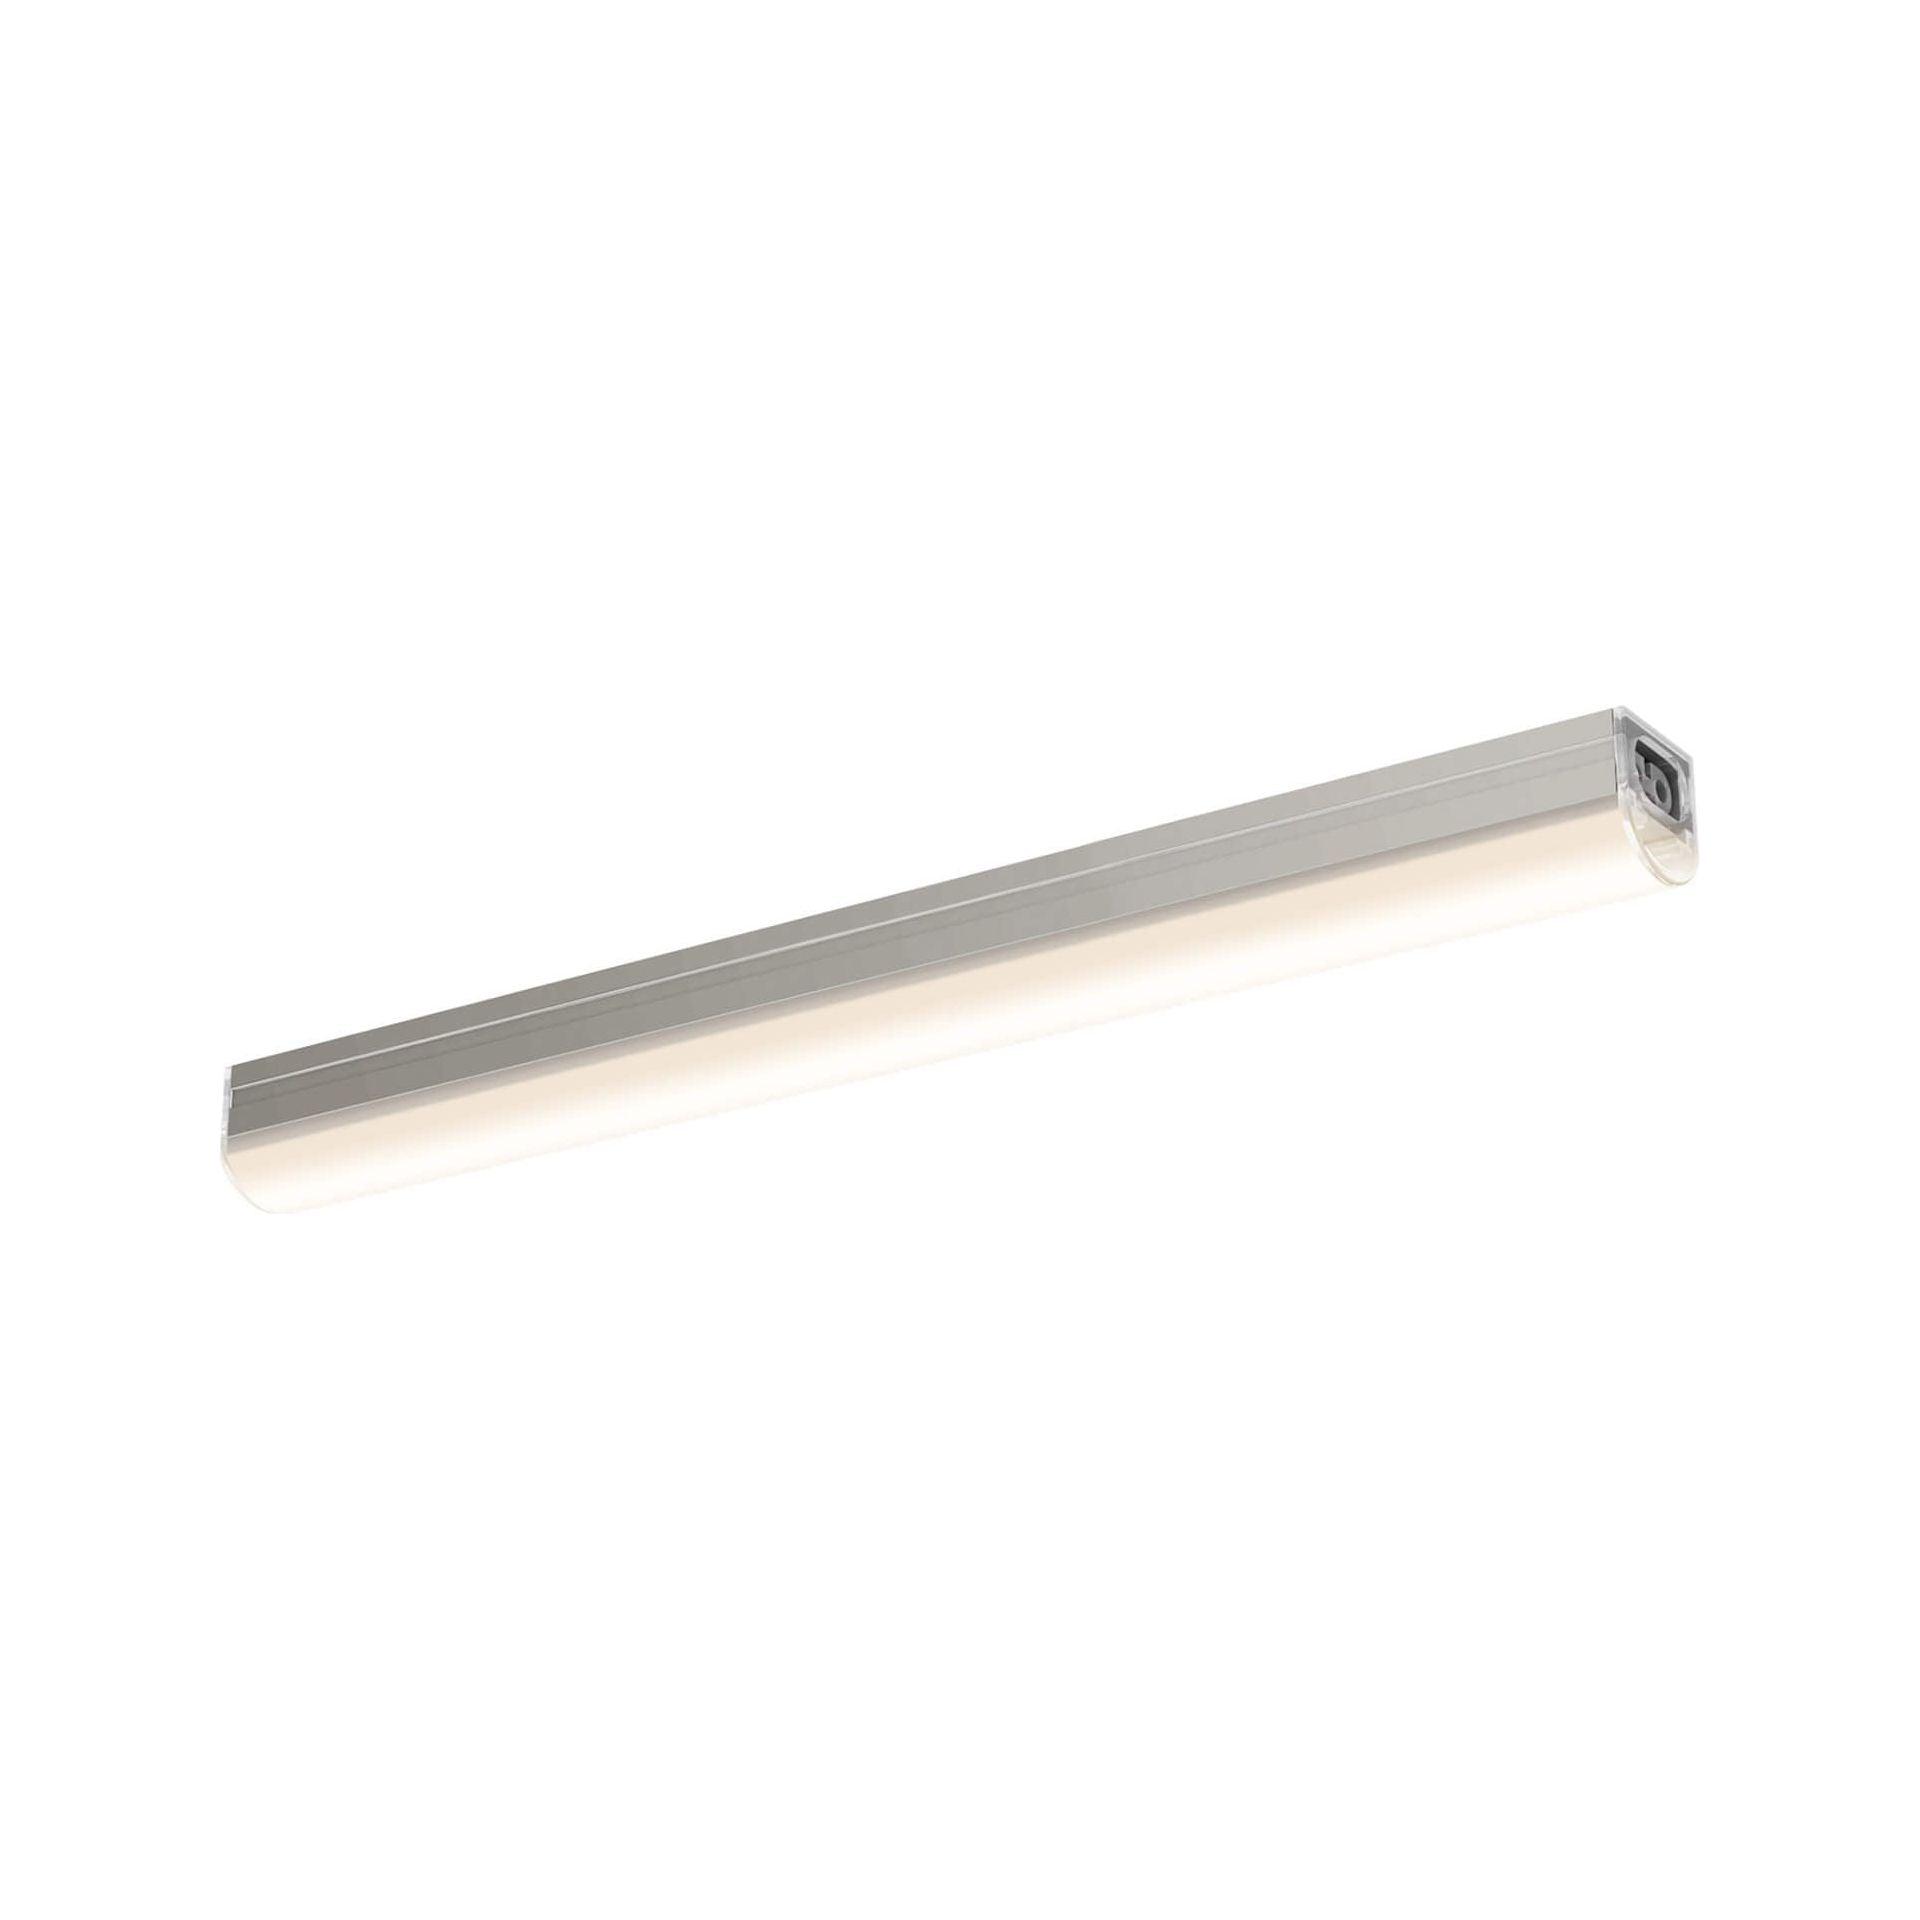 DALS - 9" PowerLED Linear Under Cabinet Light - Lights Canada